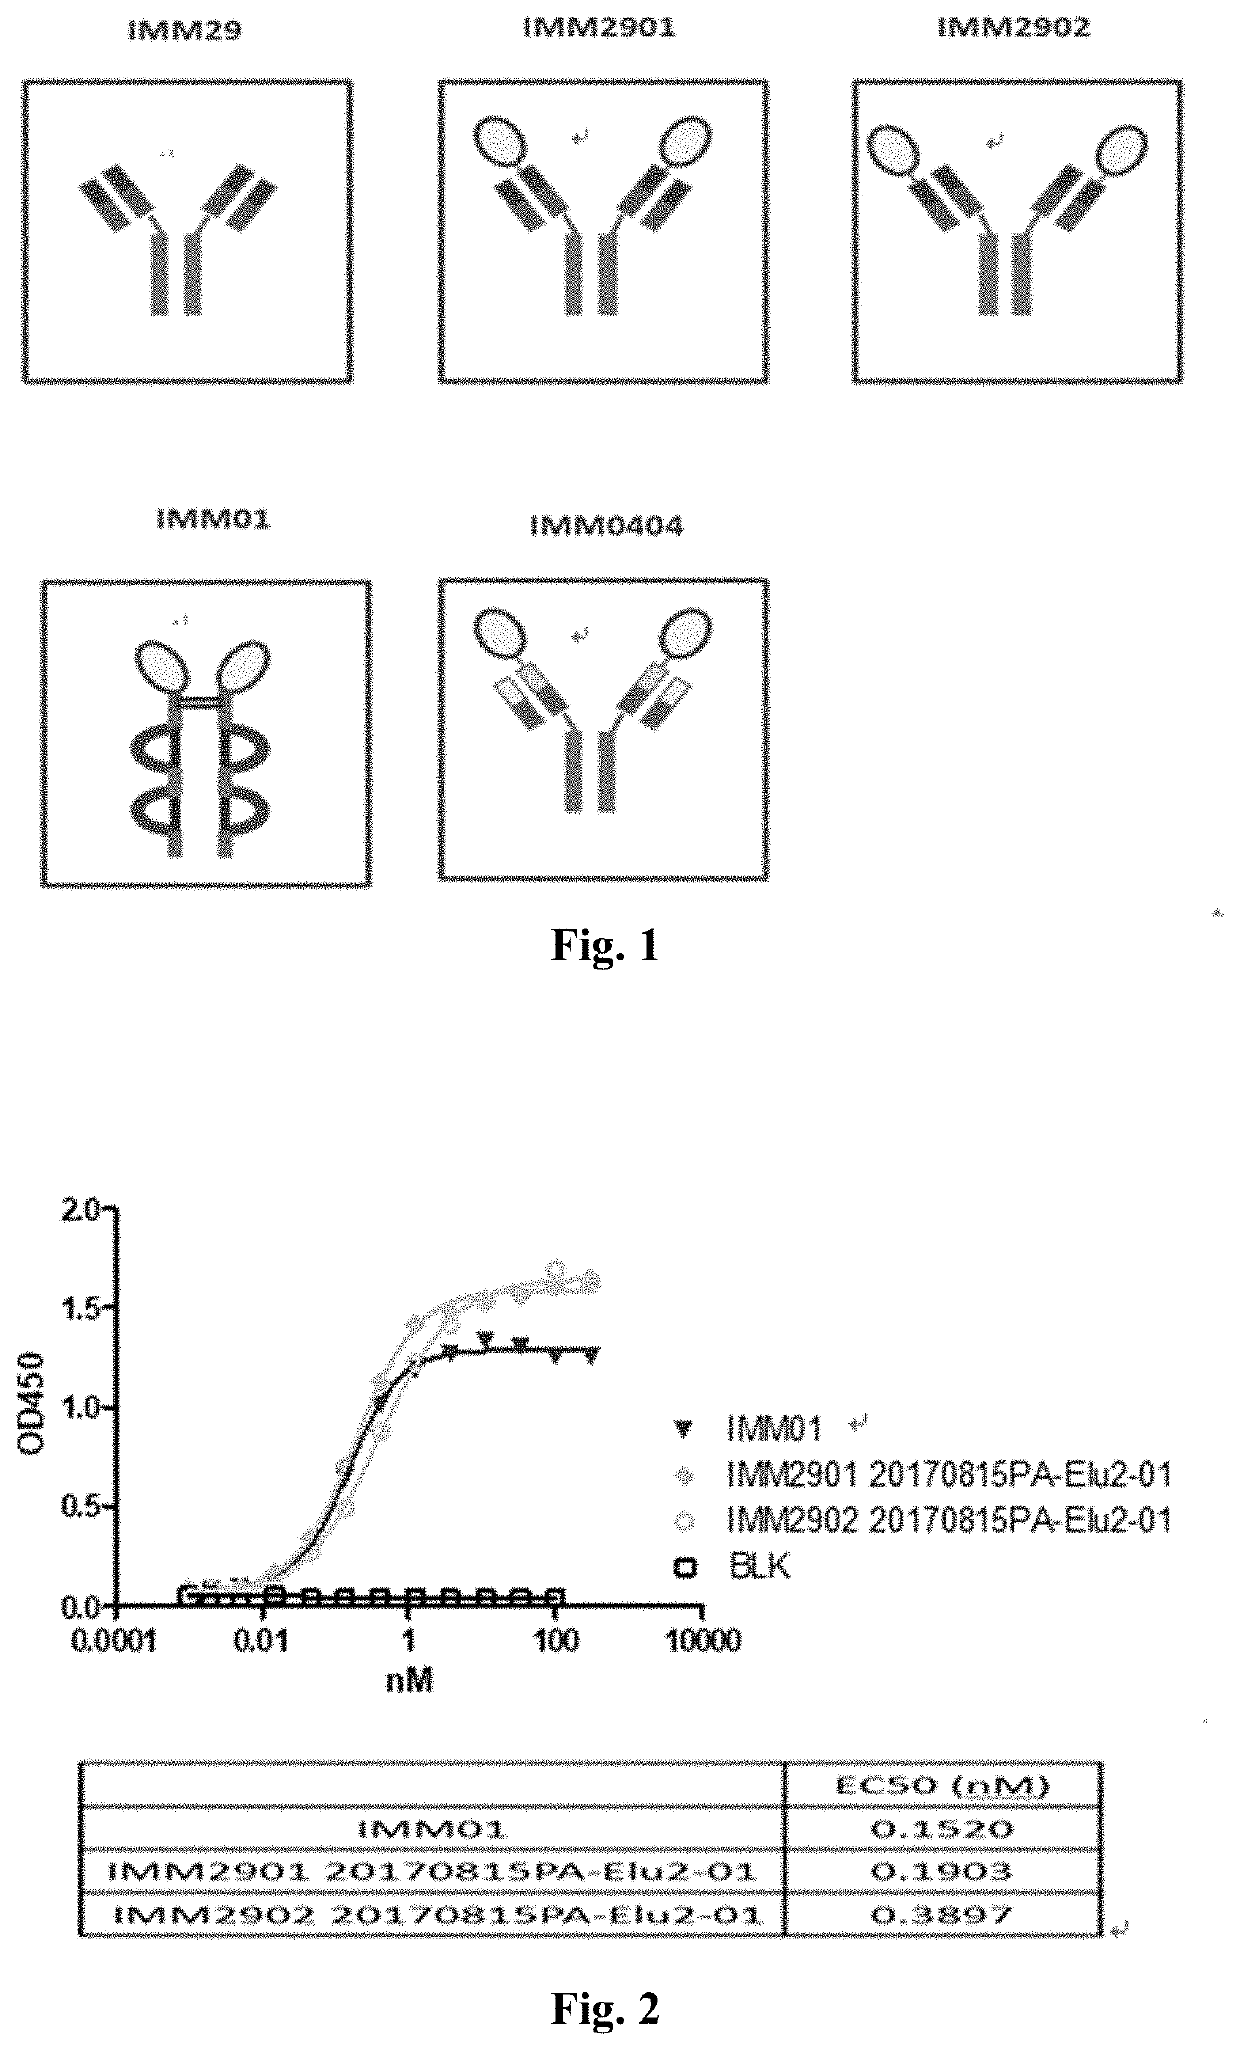 Recombinant bifunctional protein targeting cd47 and her2